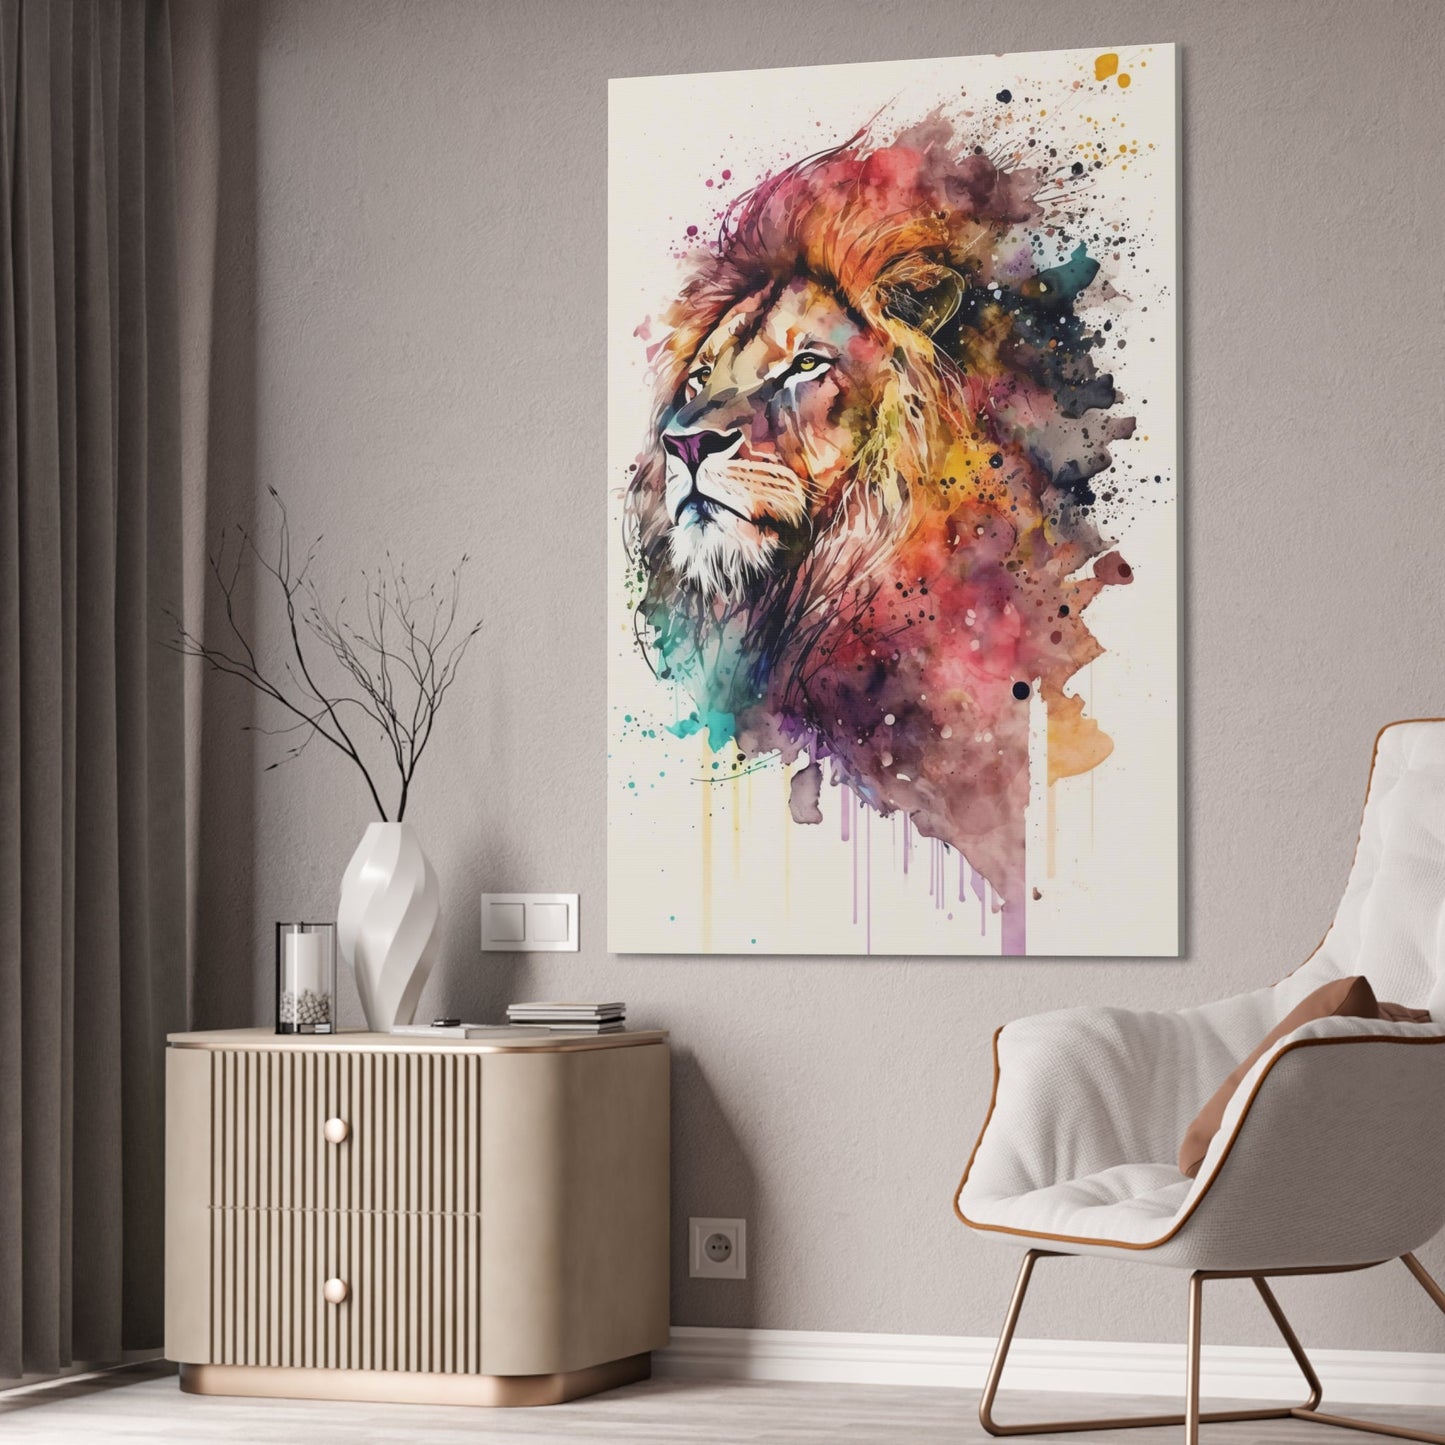 The King's Portrait: Artistic Print on Framed Canvas of a Regal Lion